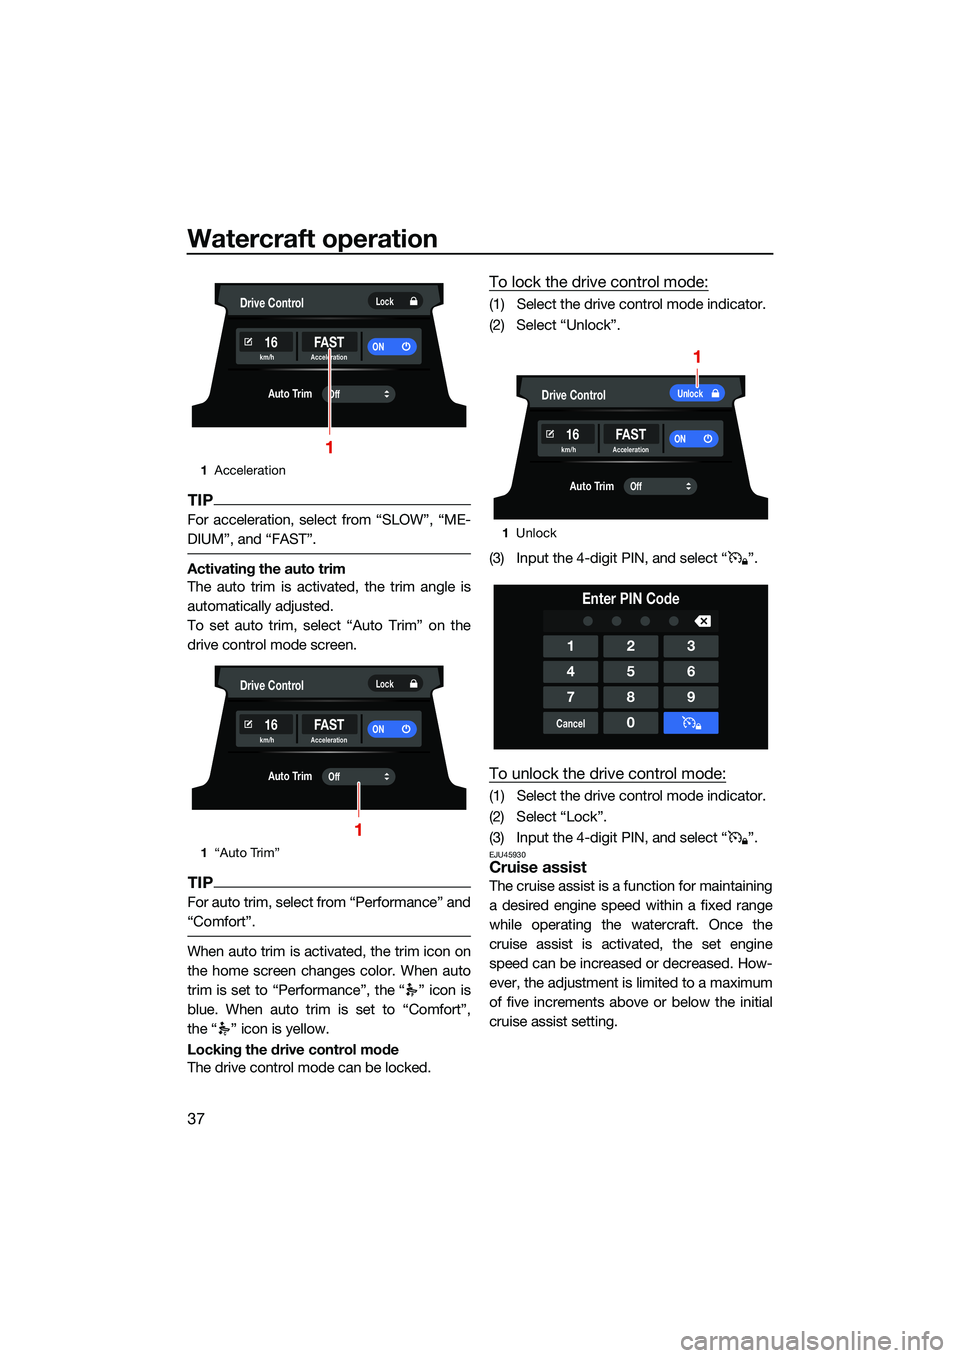 YAMAHA FX HO CRUISER 2022  Owners Manual Watercraft operation
37
TIP
For acceleration, select from “SLOW”, “ME-
DIUM”, and “FAST”.
Activating the auto trim
The auto trim is activated, the trim angle is
automatically adjusted.
To 